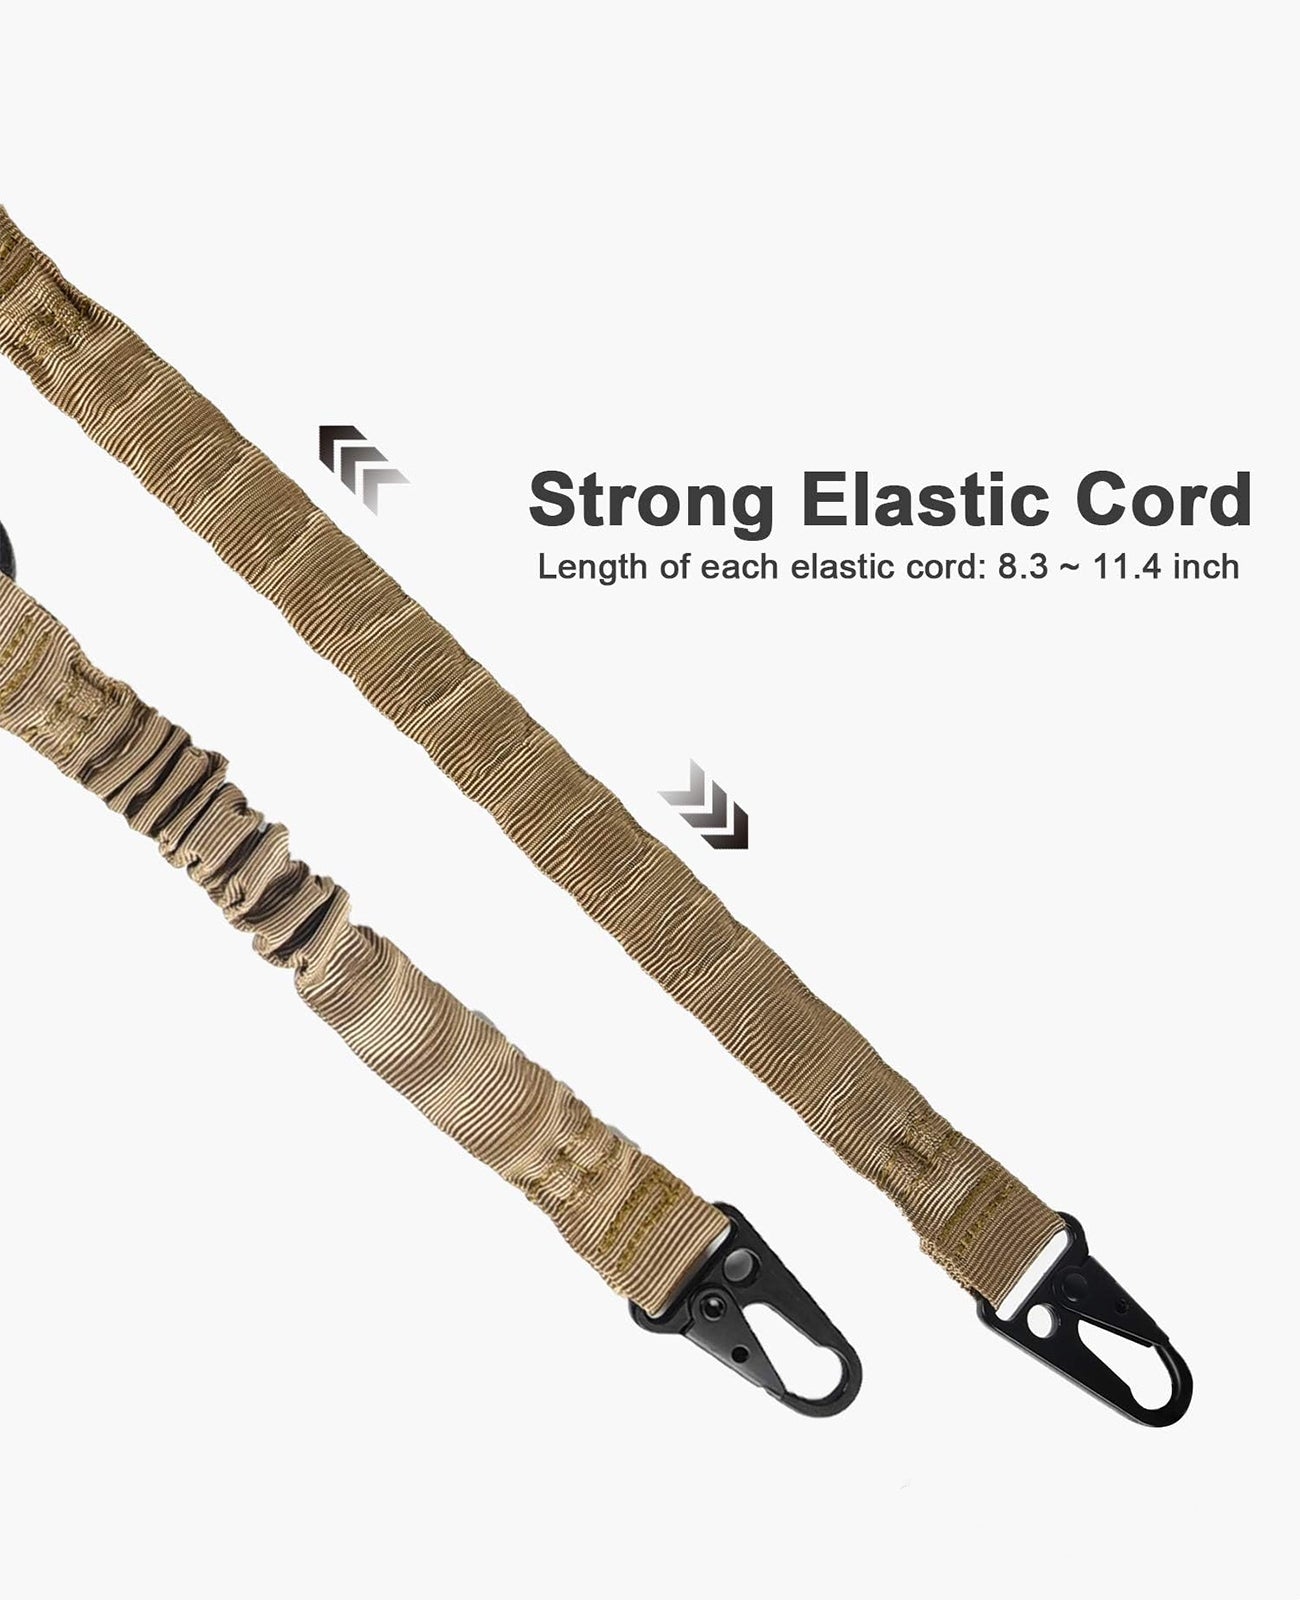 2 Point Gun Sling with Elastic Cord Design